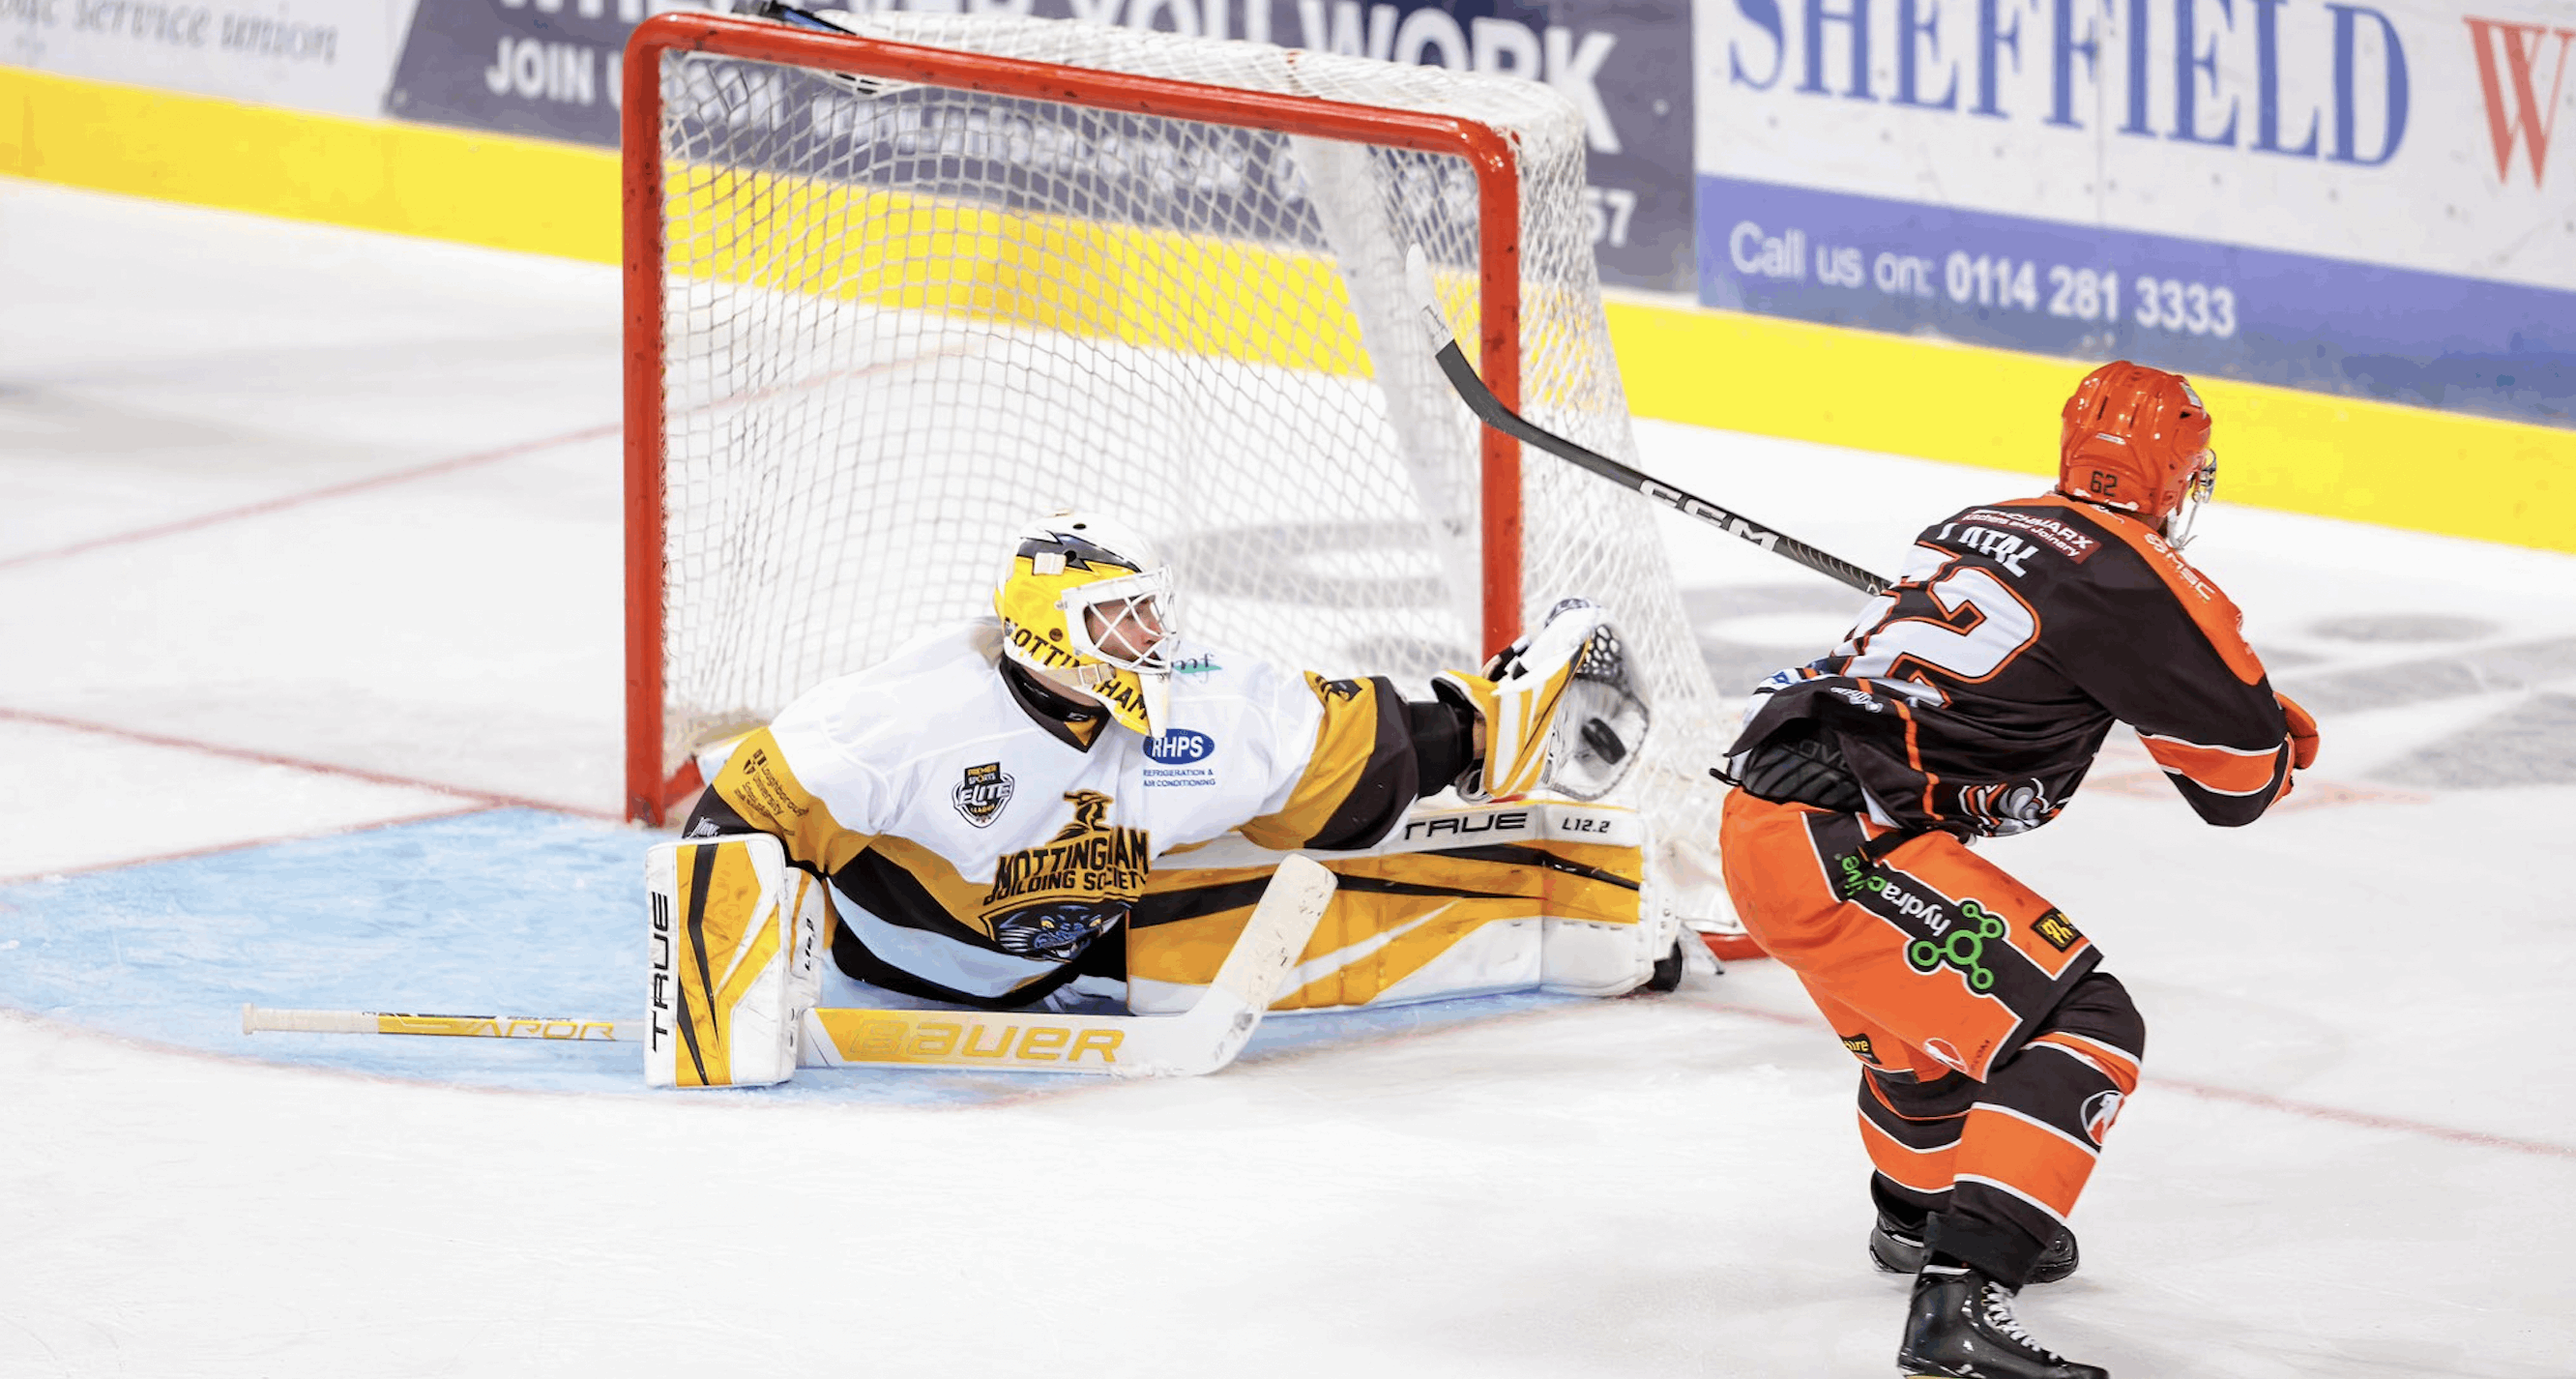 CHALLENGE CUP: STEELERS 2-1 PANTHERS Top Image